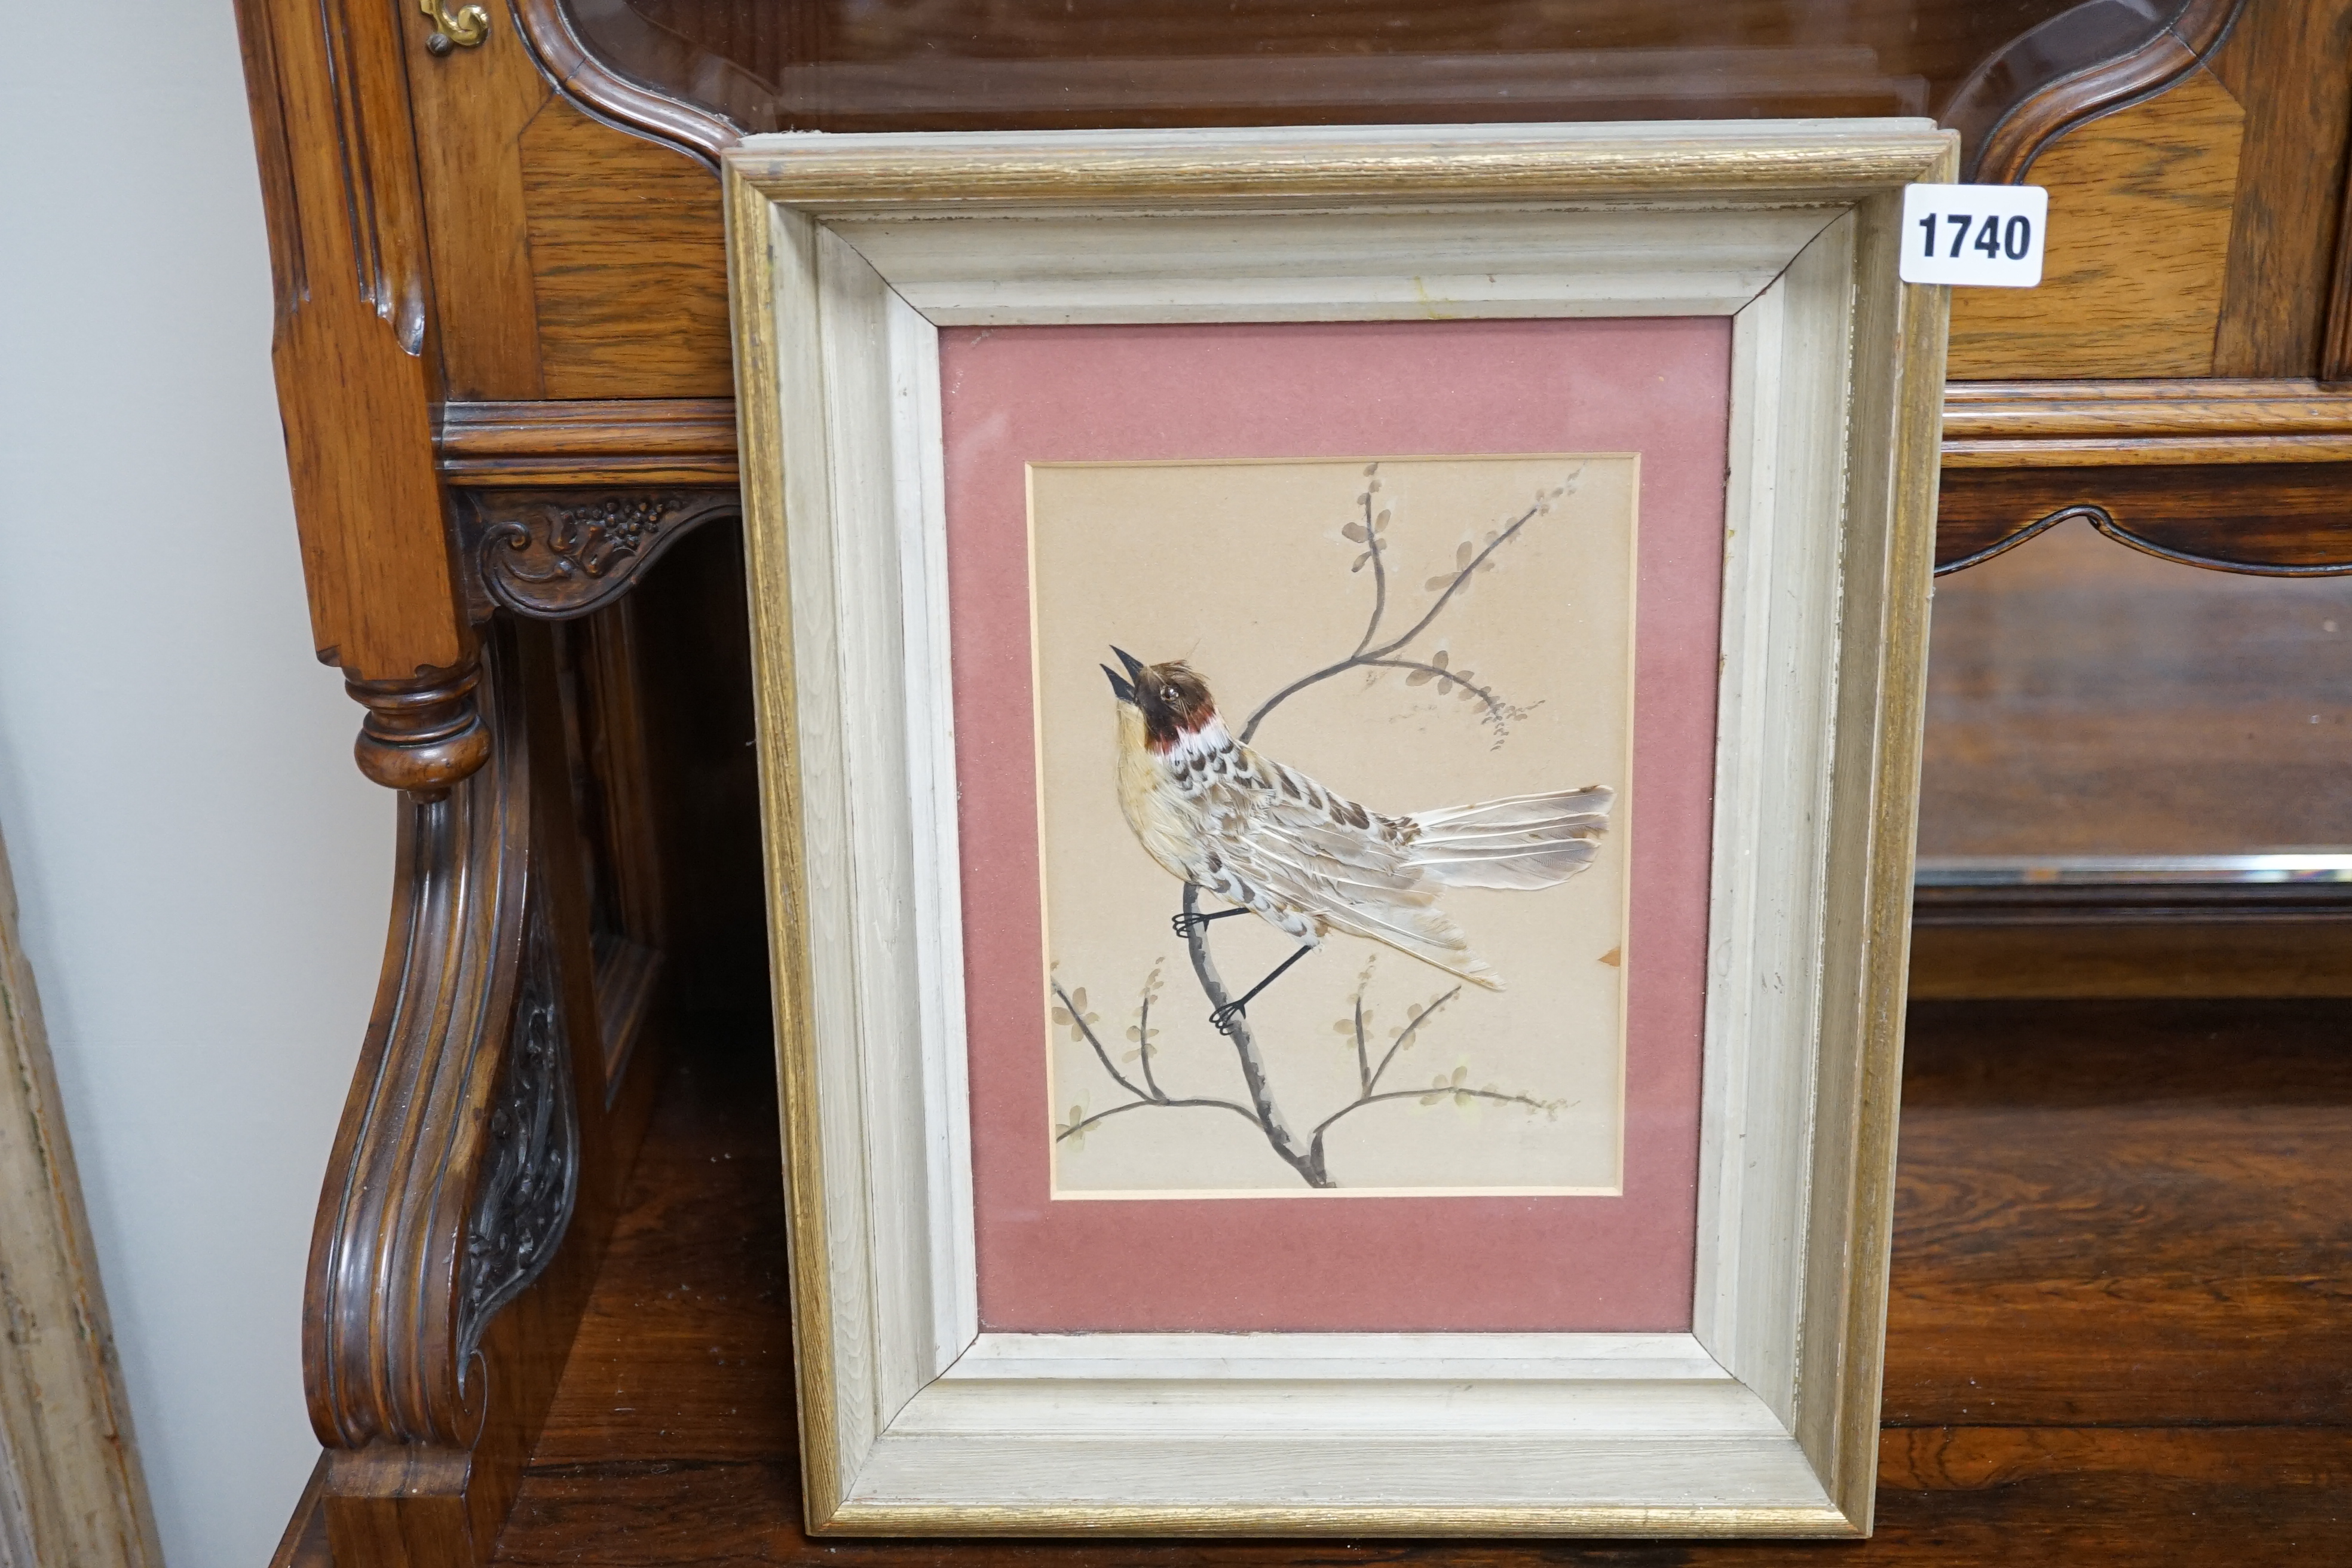 Late 19th / early 20th century, watercolour and feather picture, Bird on a branch, 19.5 x 14cm. Condition - poor to fair discolouration and tears to the paper